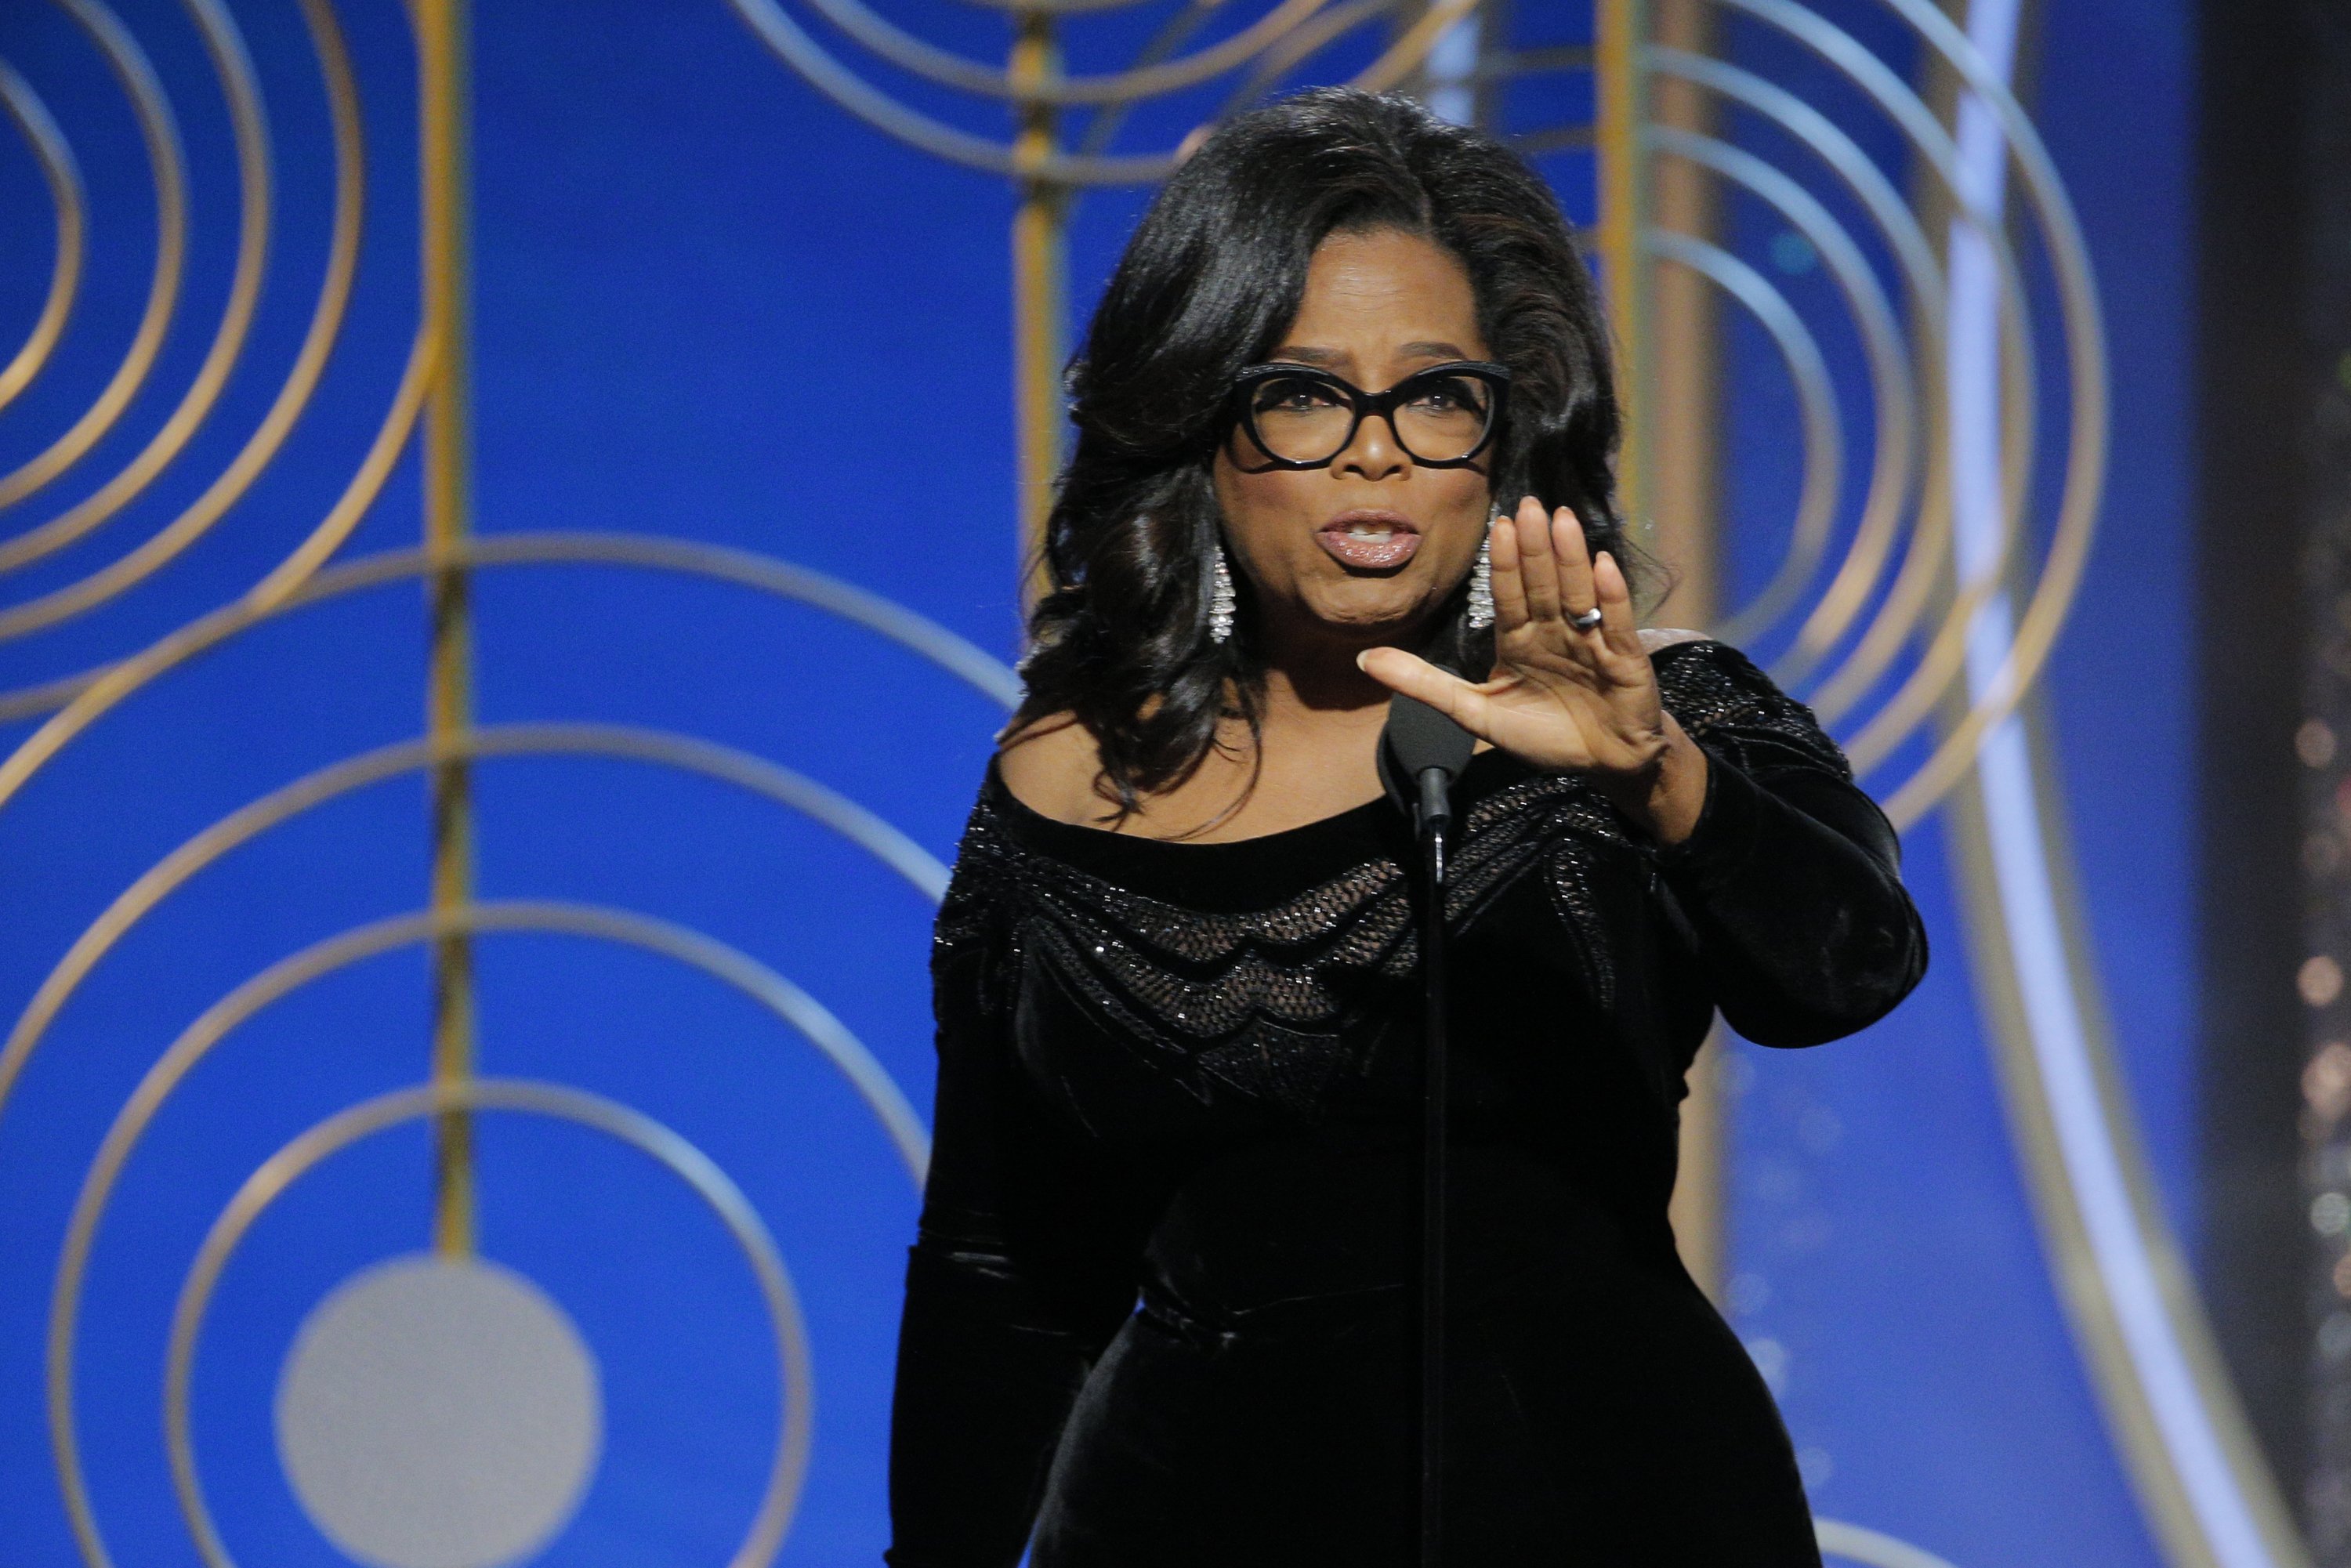 Oprah Winfrey at the Golden Globe Awards in Beverly Hills, California on Jan. 7, 2018 | Photo: Getty Images